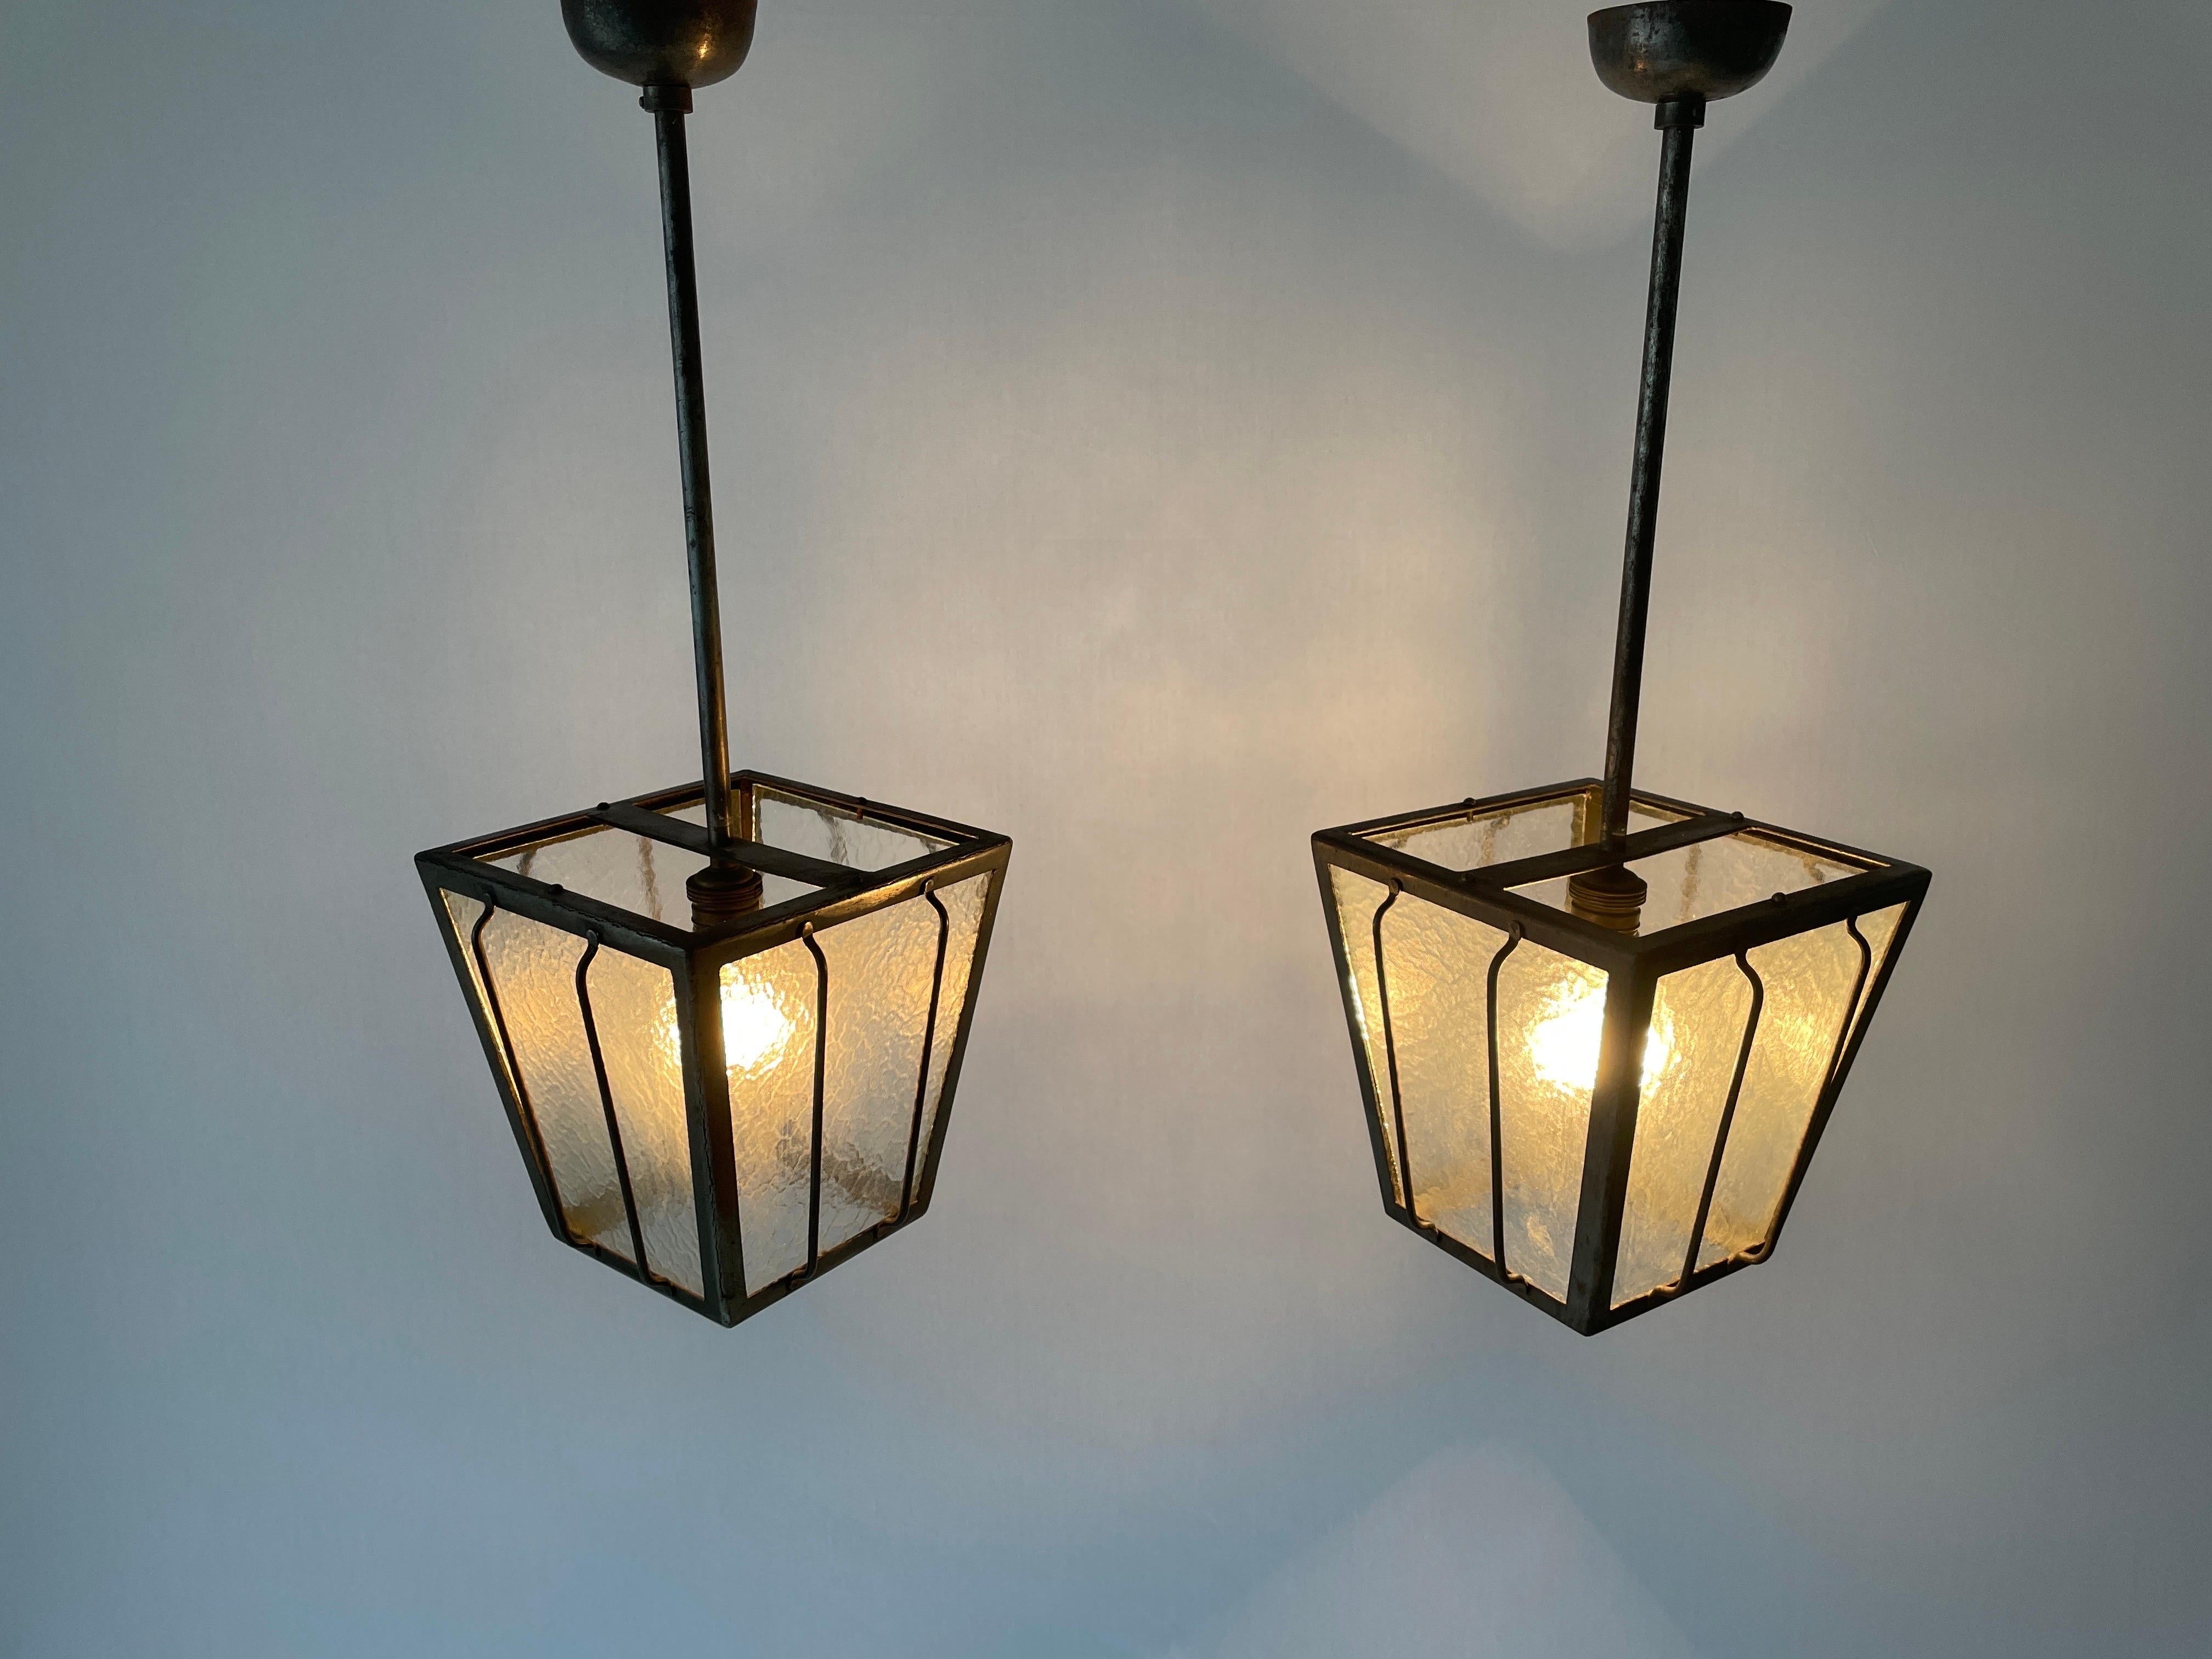 Frosted Glass Milano Apartment Pair of Ceiling Lamps, 1950s, Italy For Sale 4